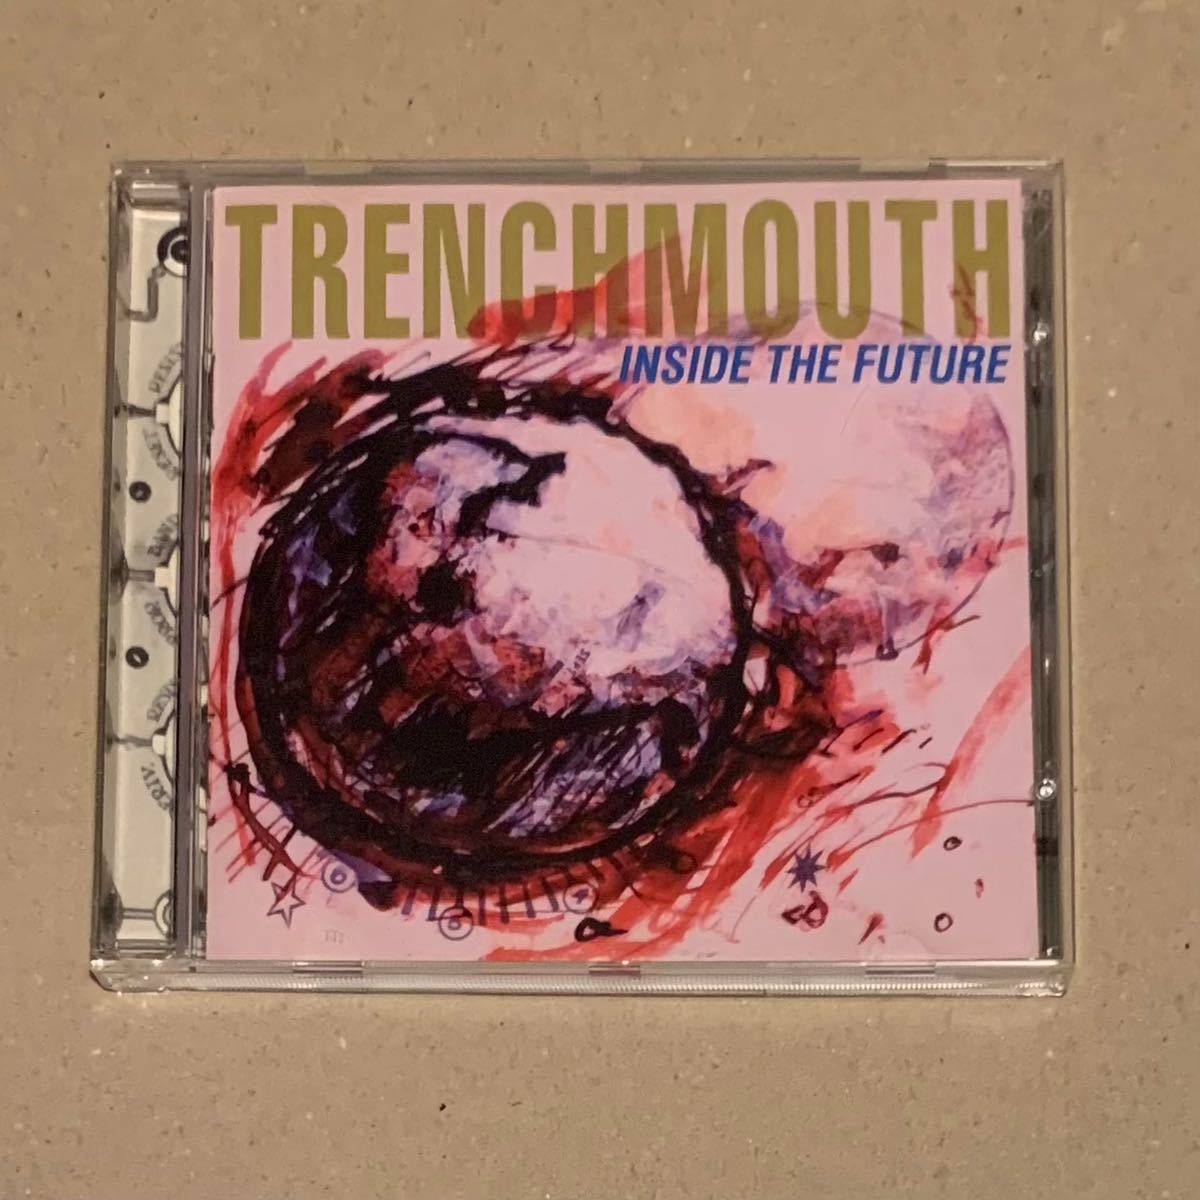 Trenchmouth Inside The Future CD 廃盤 Post Punk chicago Rock Skene! Records オルタナティブ faith no more green day US インディー_画像1